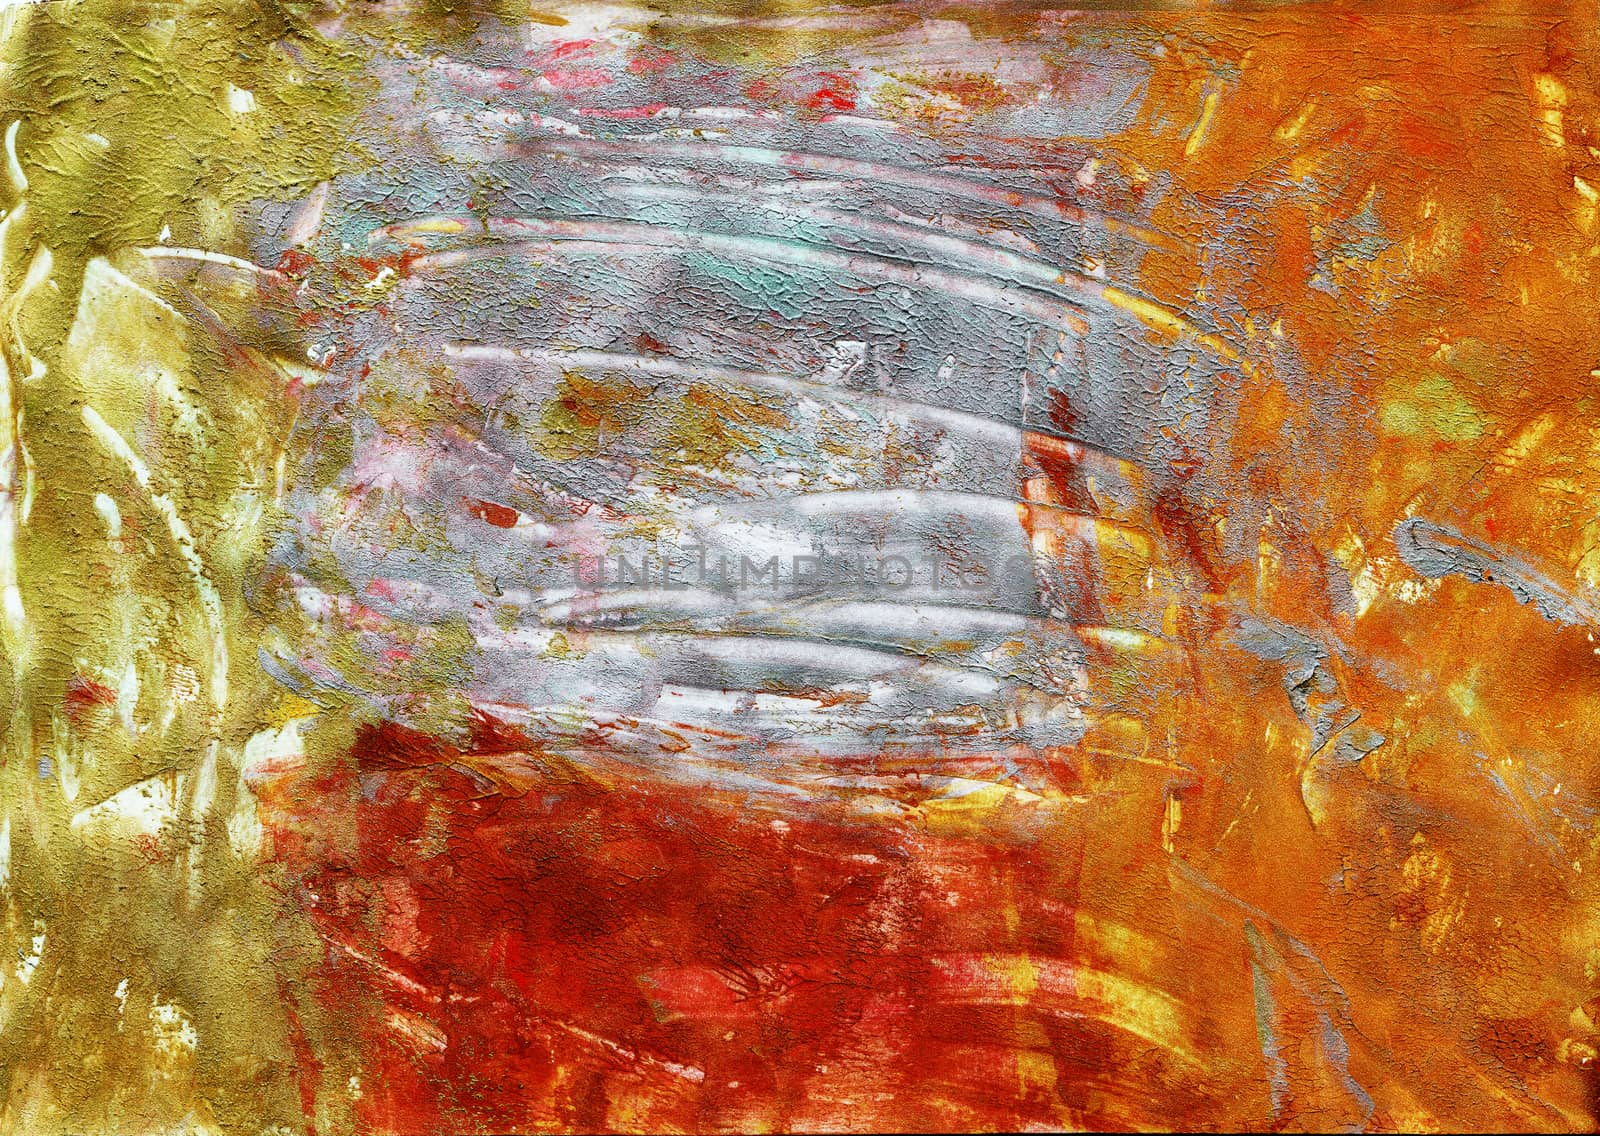 Autumn colour abstract background. Gold, silver, red and orange acrylic and gouache brush strokes. Hand painted texture, splashes, stains, smears. Design for packaging, card, wallpaper, gift wrapping.